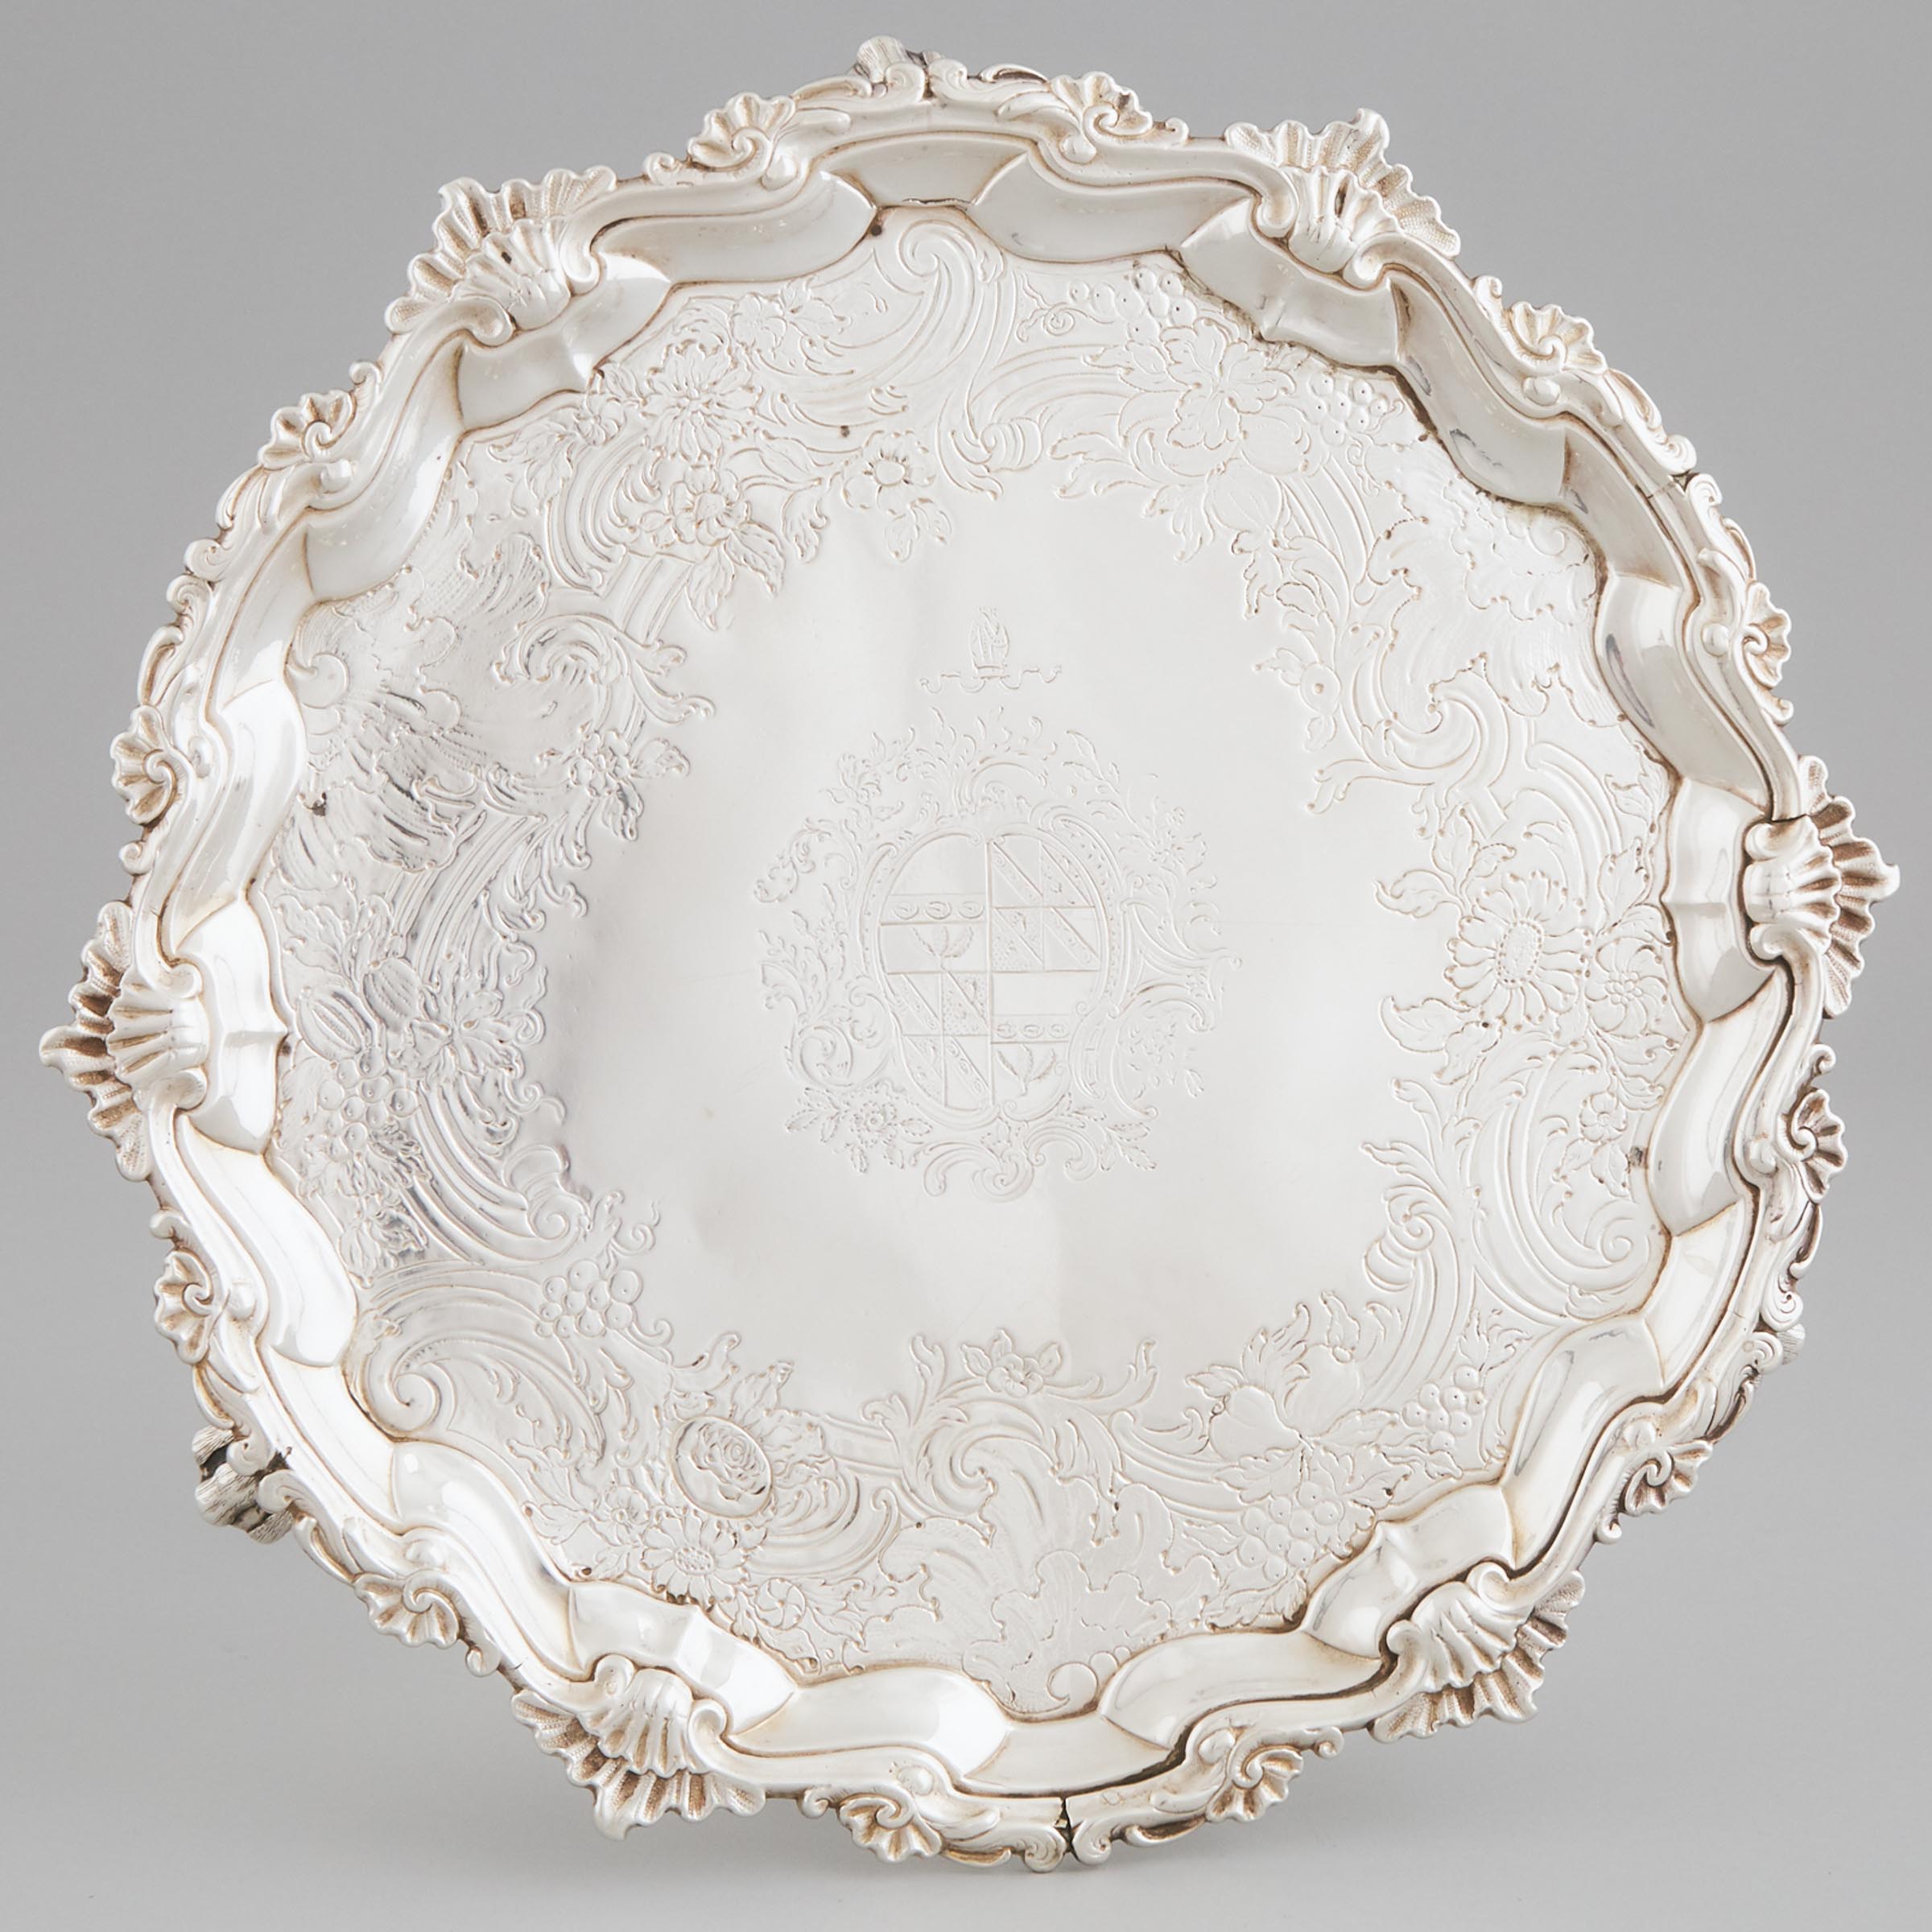 George II Silver Shaped Circular Salver, possibly William Justis, London, 1751